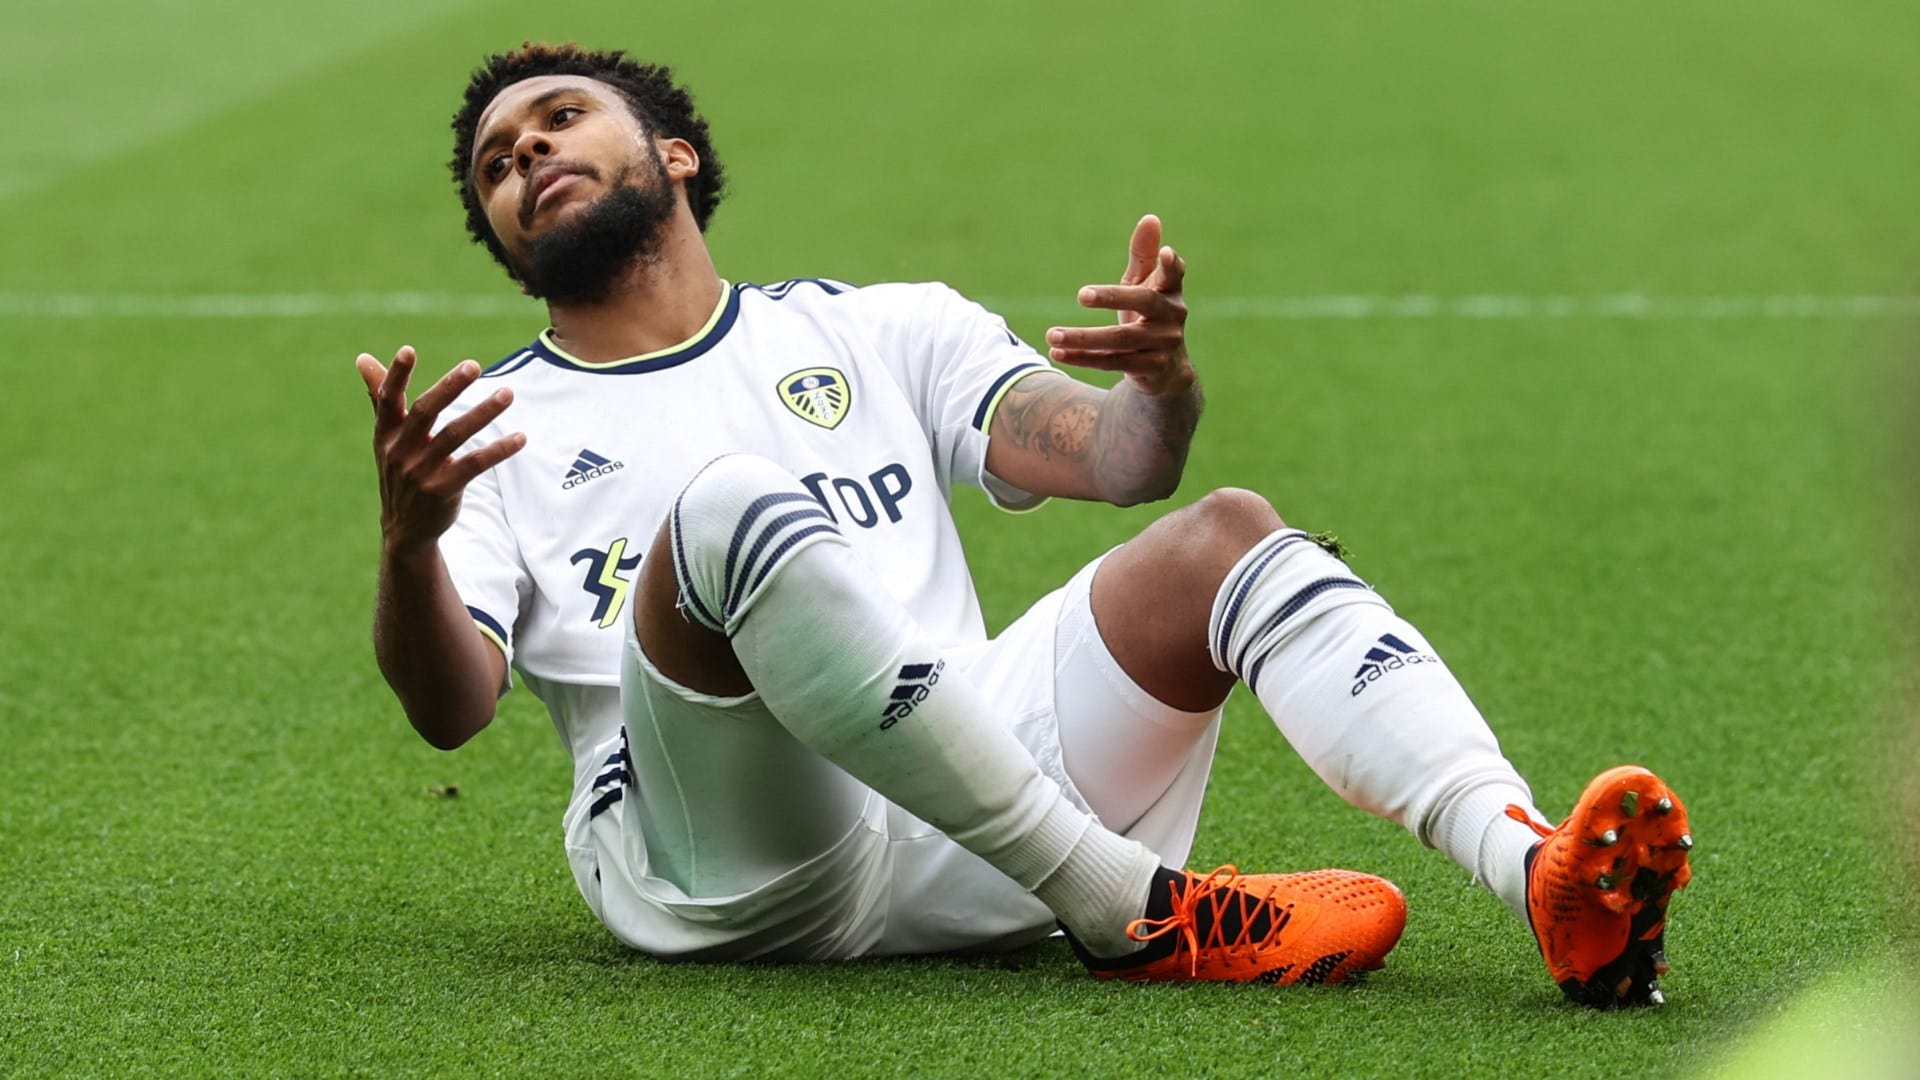 Fat b*stard chants, Harambe tweets and relegation: USMNT star Weston McKennie's Leeds move was an absolute disaster